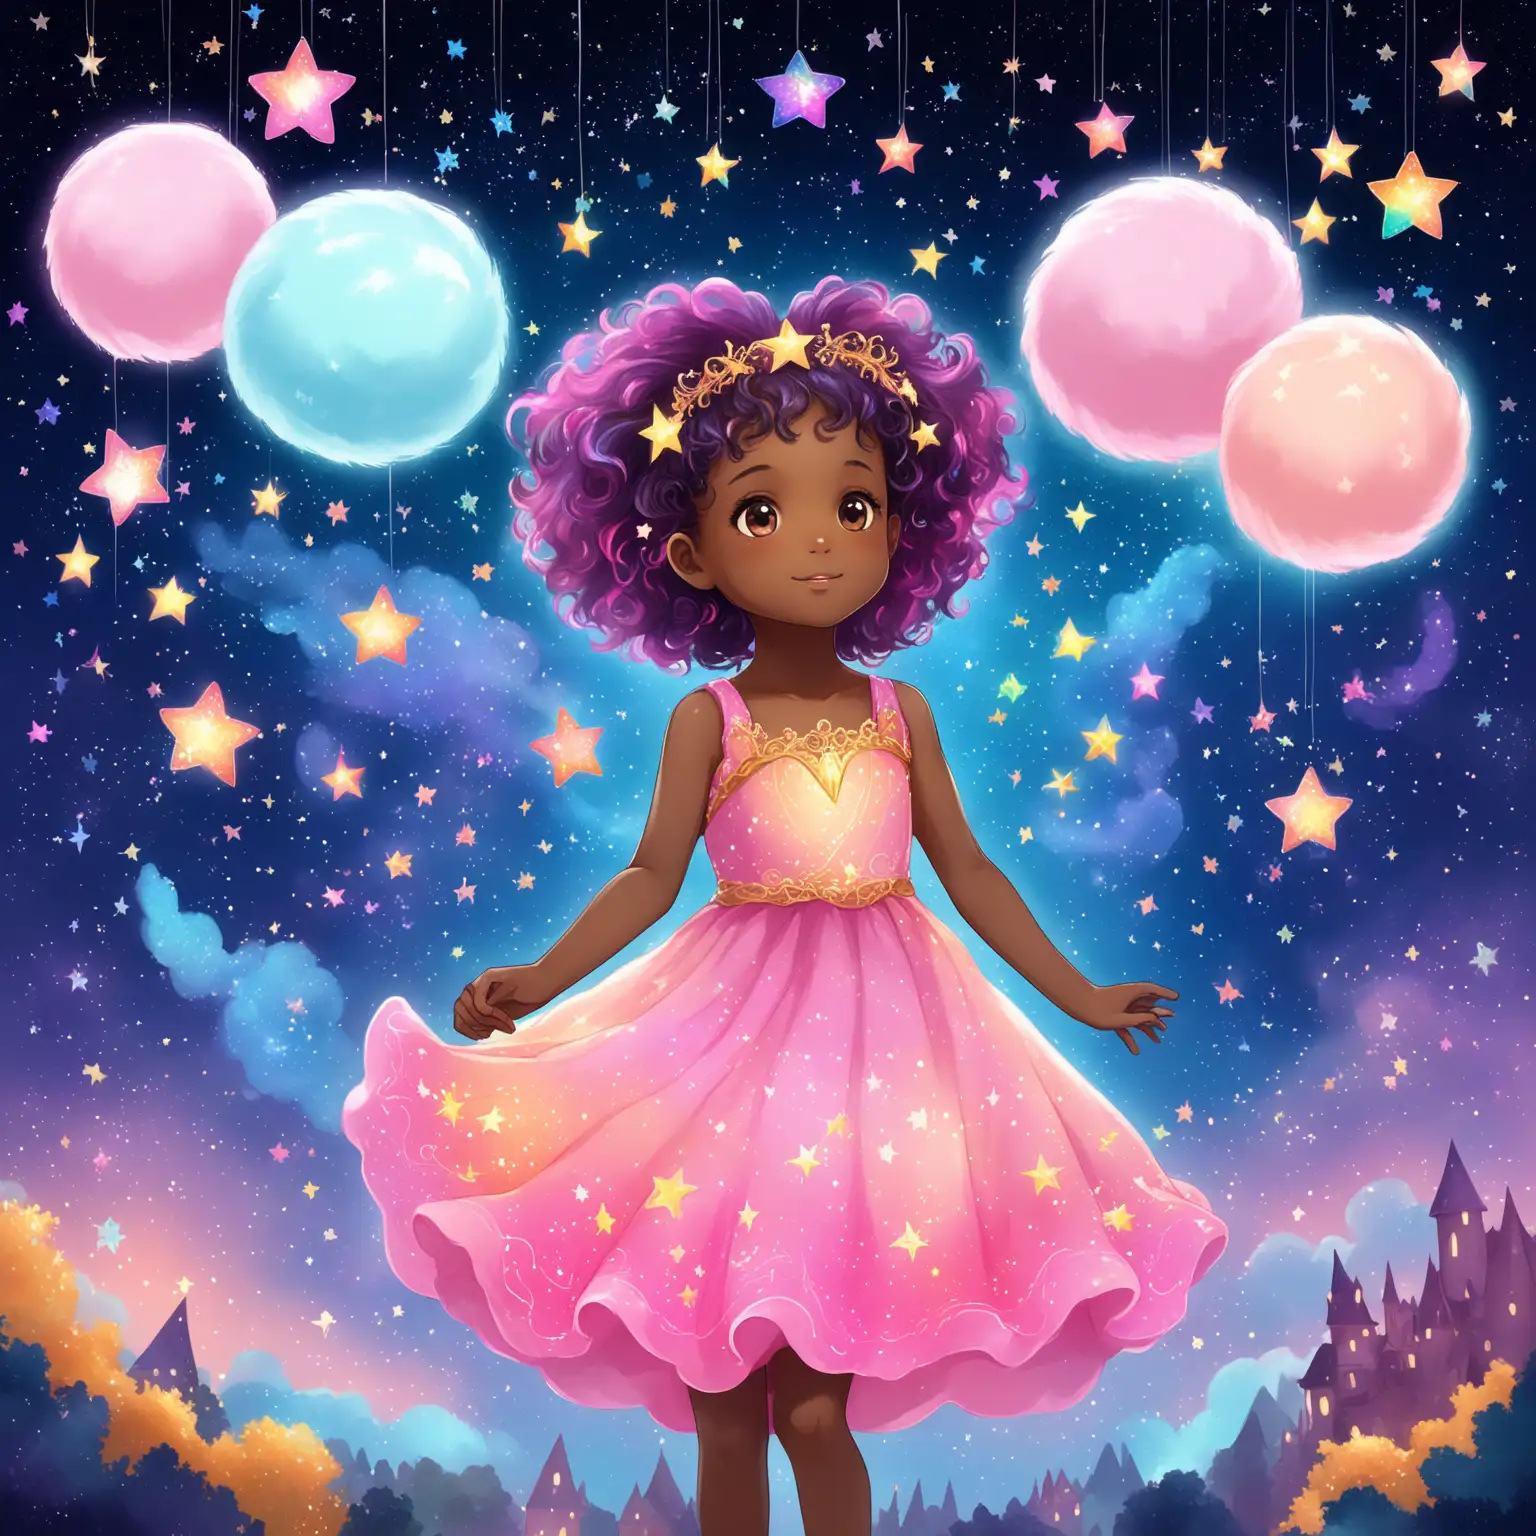 A charming digital illustration of a 7-year-old black girl with pink cotton candy hair, twirling in a whimsical magical setting. She exudes a radiant aura and wears a colorful dress adorned with stars. Around her, there are magical elements like floating orbs and silhouettes of fairy-like creatures. The background is a dreamy blend of twinkling stars and a vibrant sky.